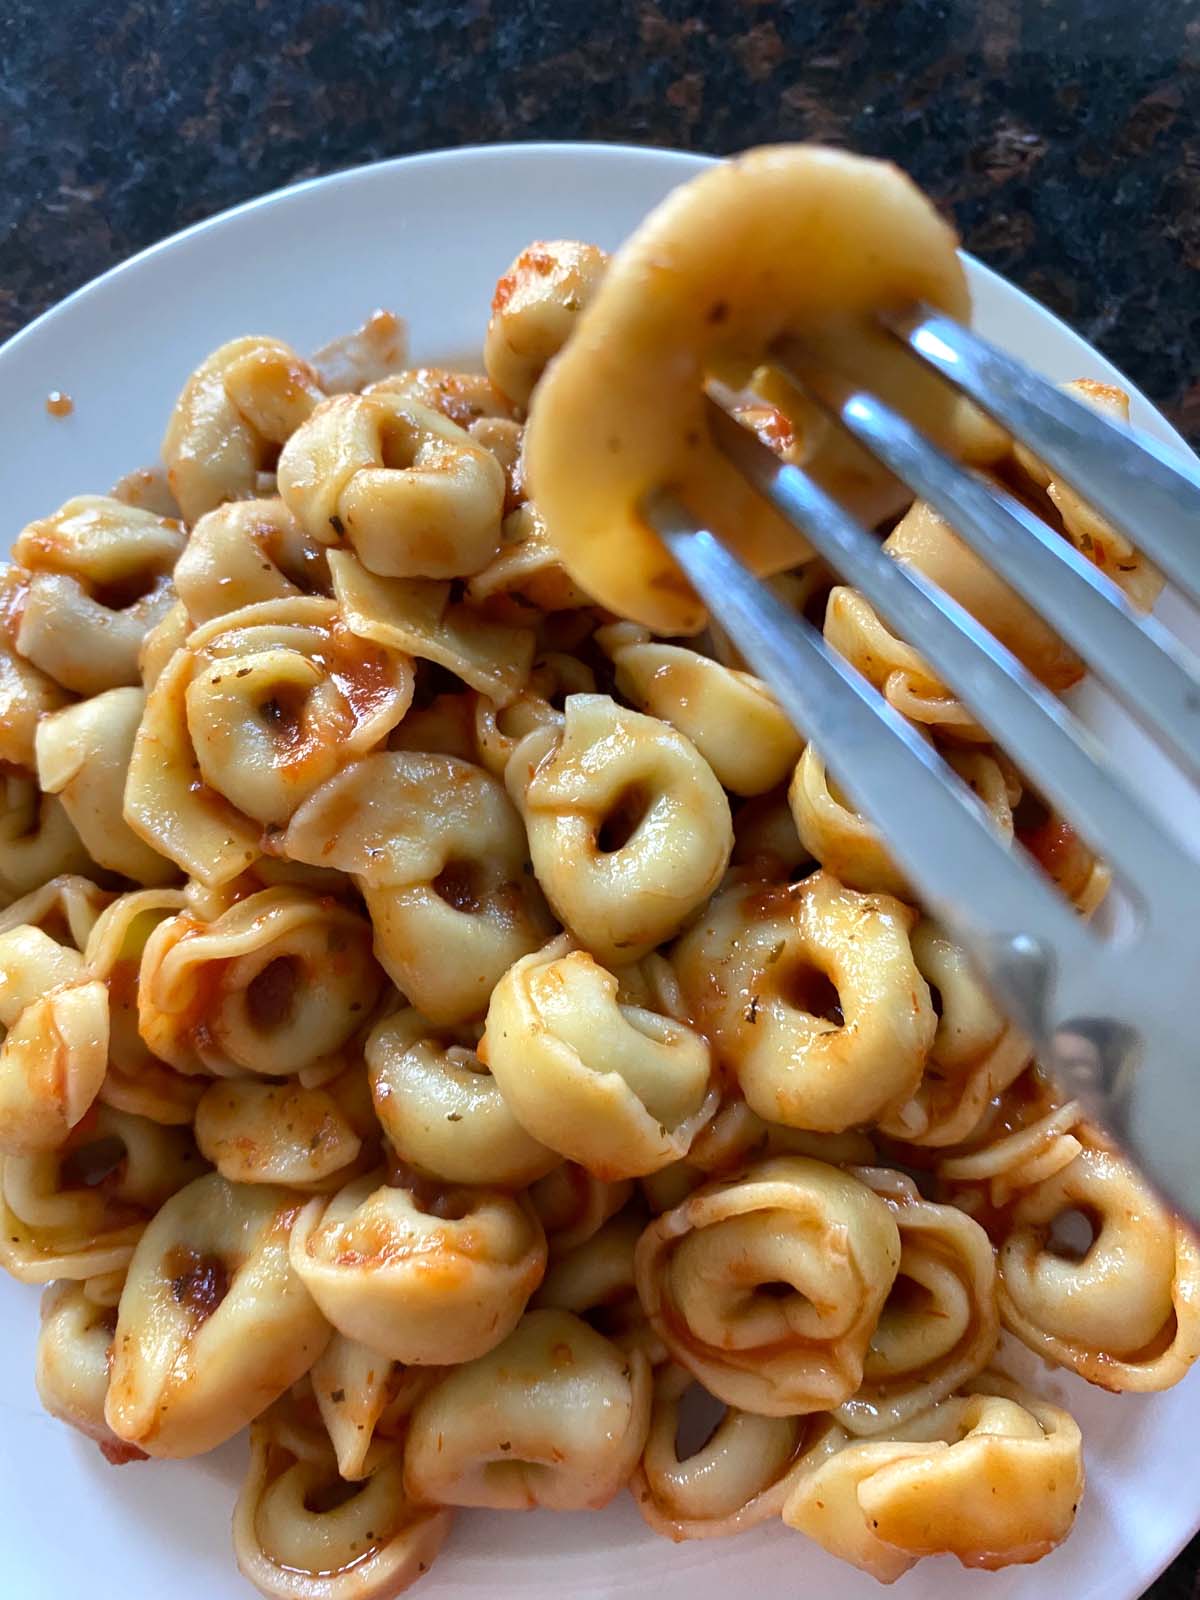 Tortellini with sauce with a fork holding up one tortellini.